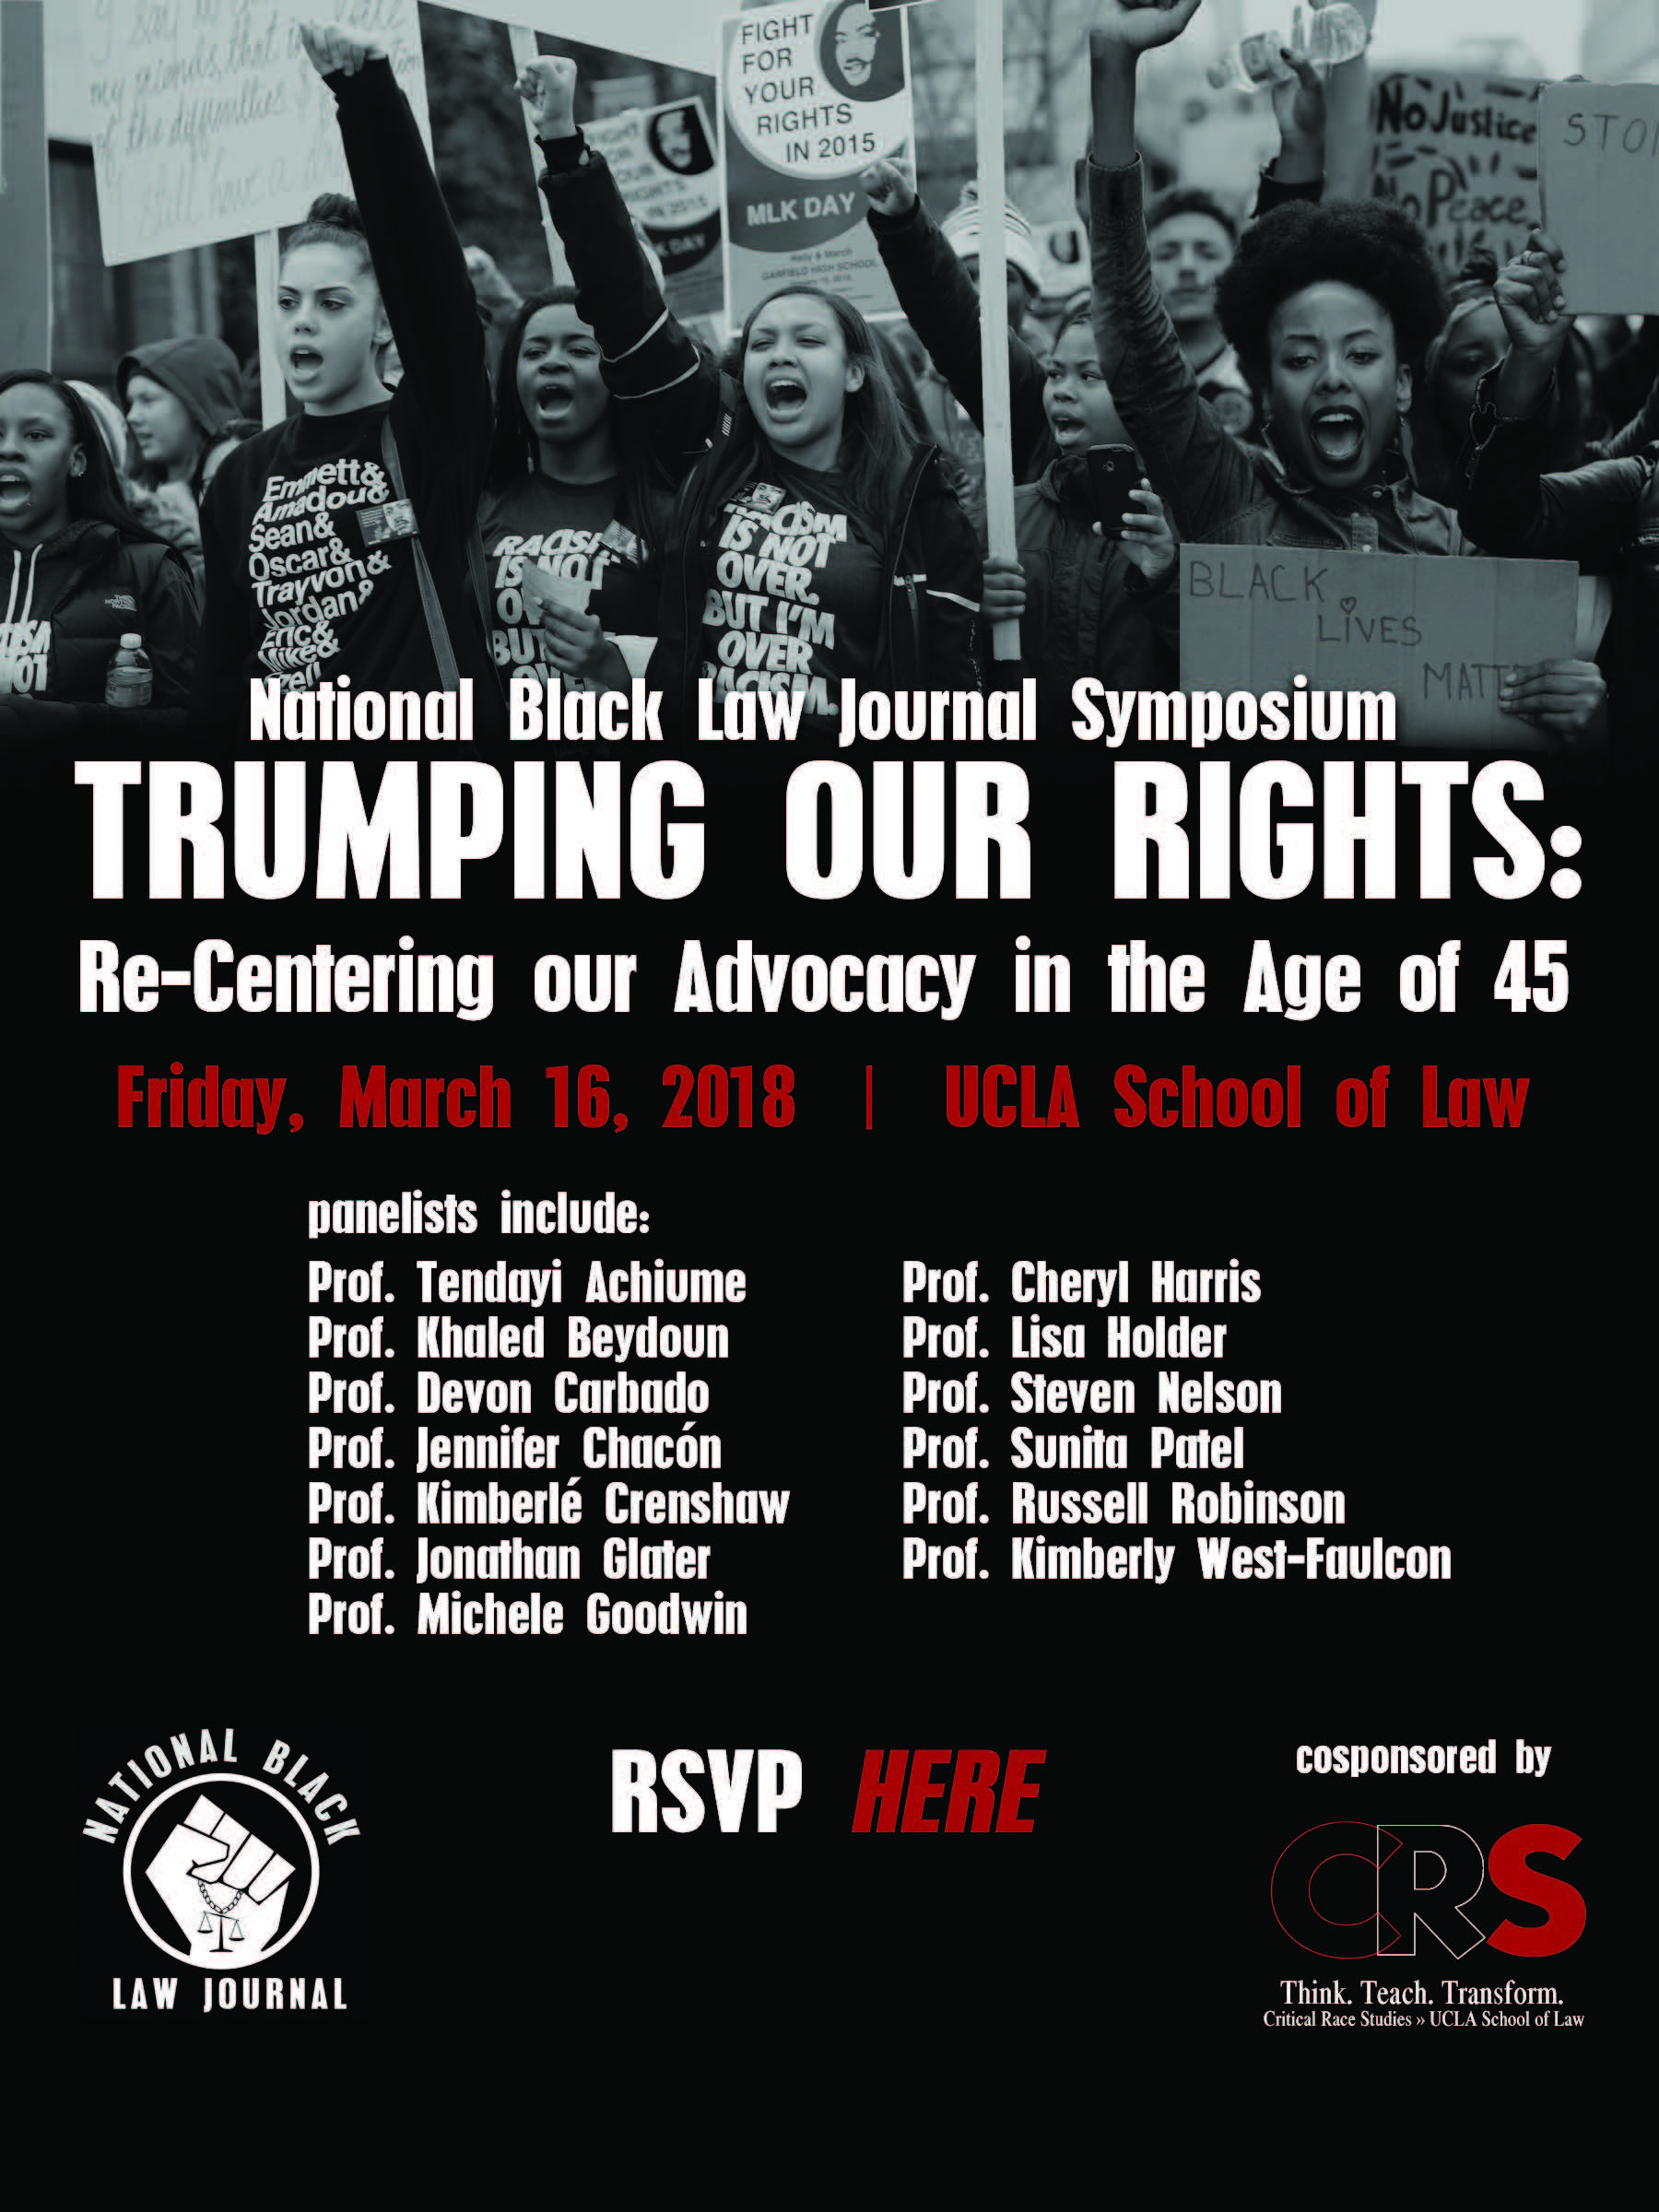 Trumping Our Rights symposium [article image]